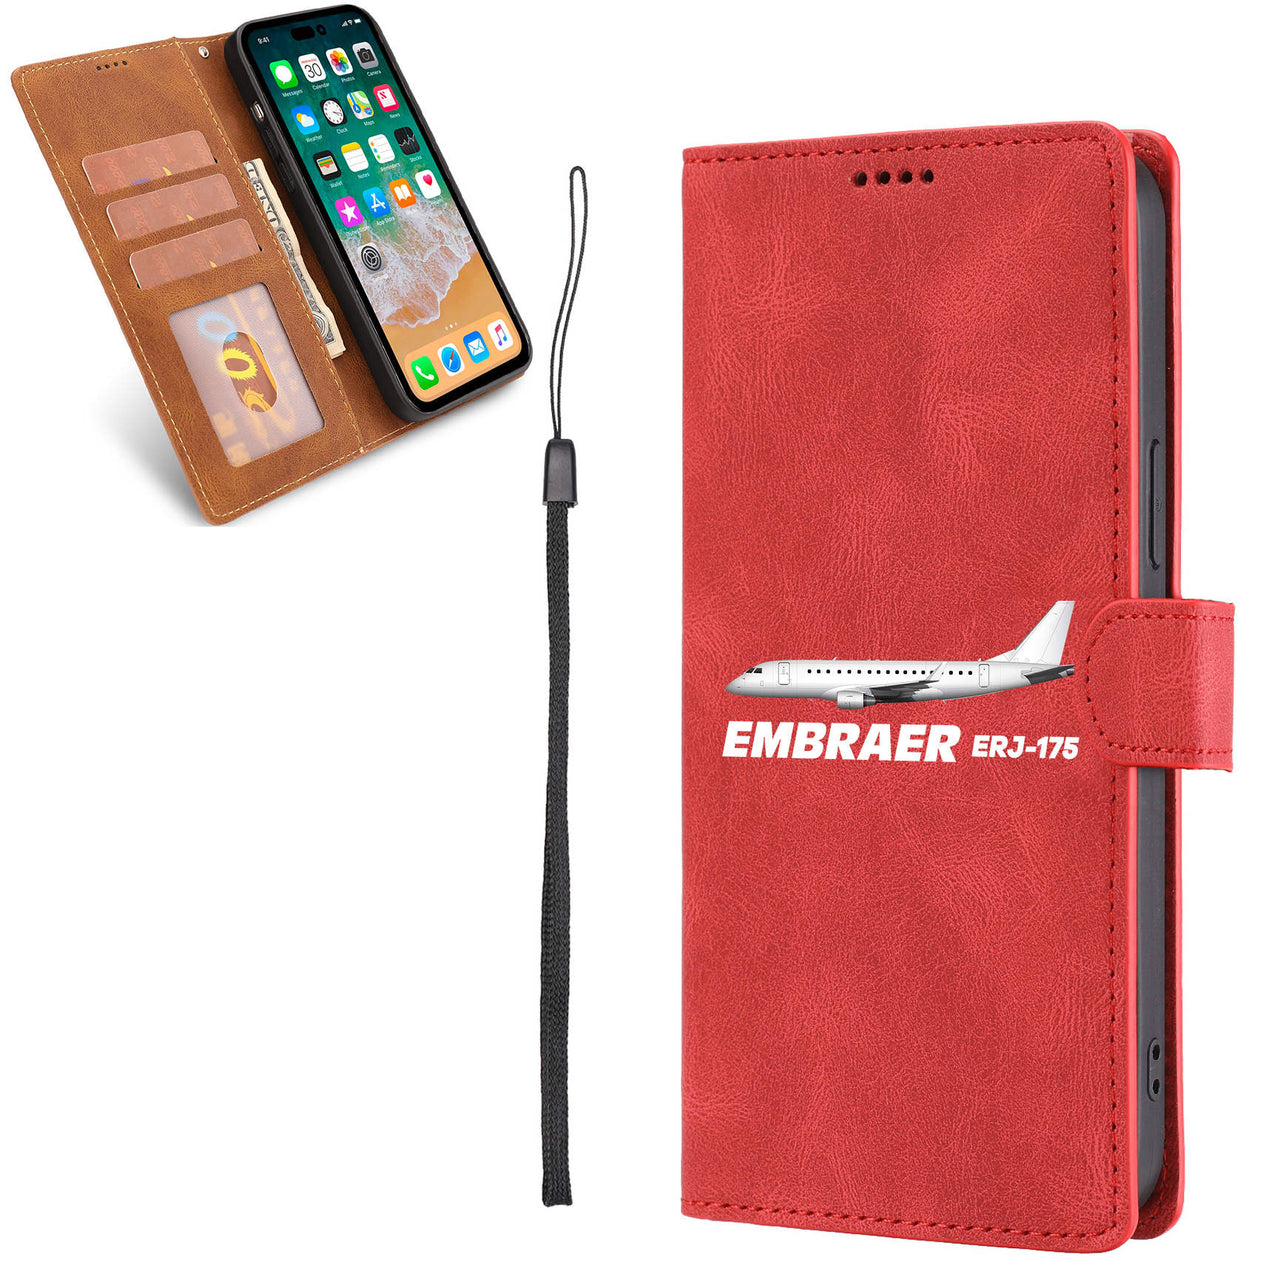 The Embraer ERJ-175 Designed Leather iPhone Cases